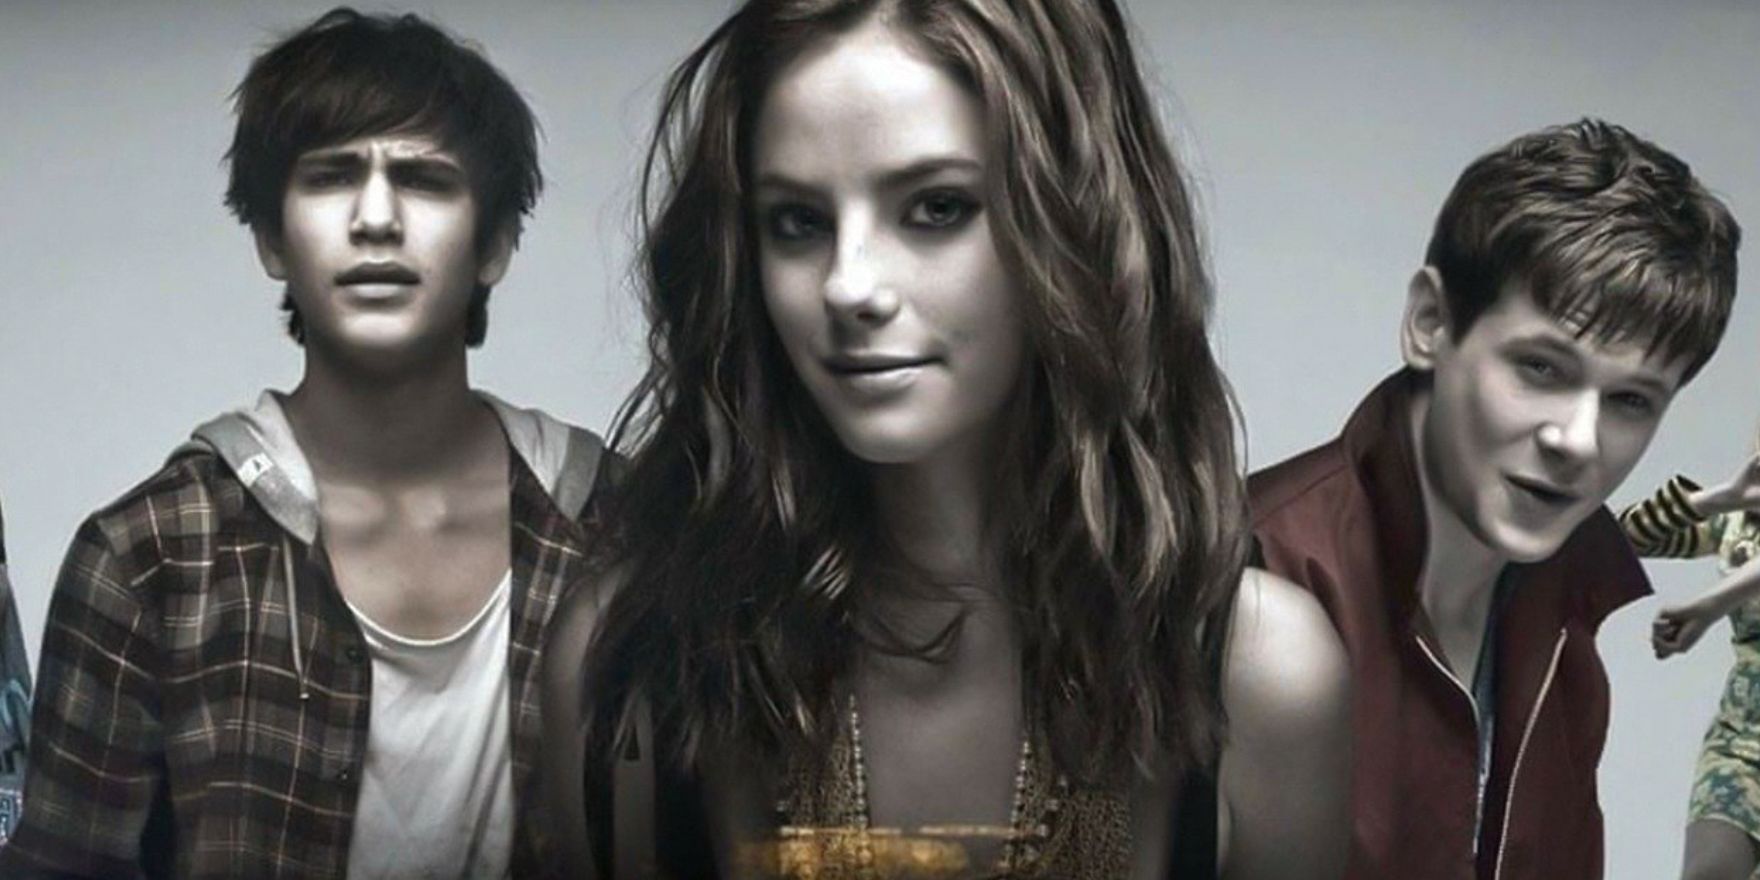 Freddie, Effy, and Cook in a promotional image for Skins season 3